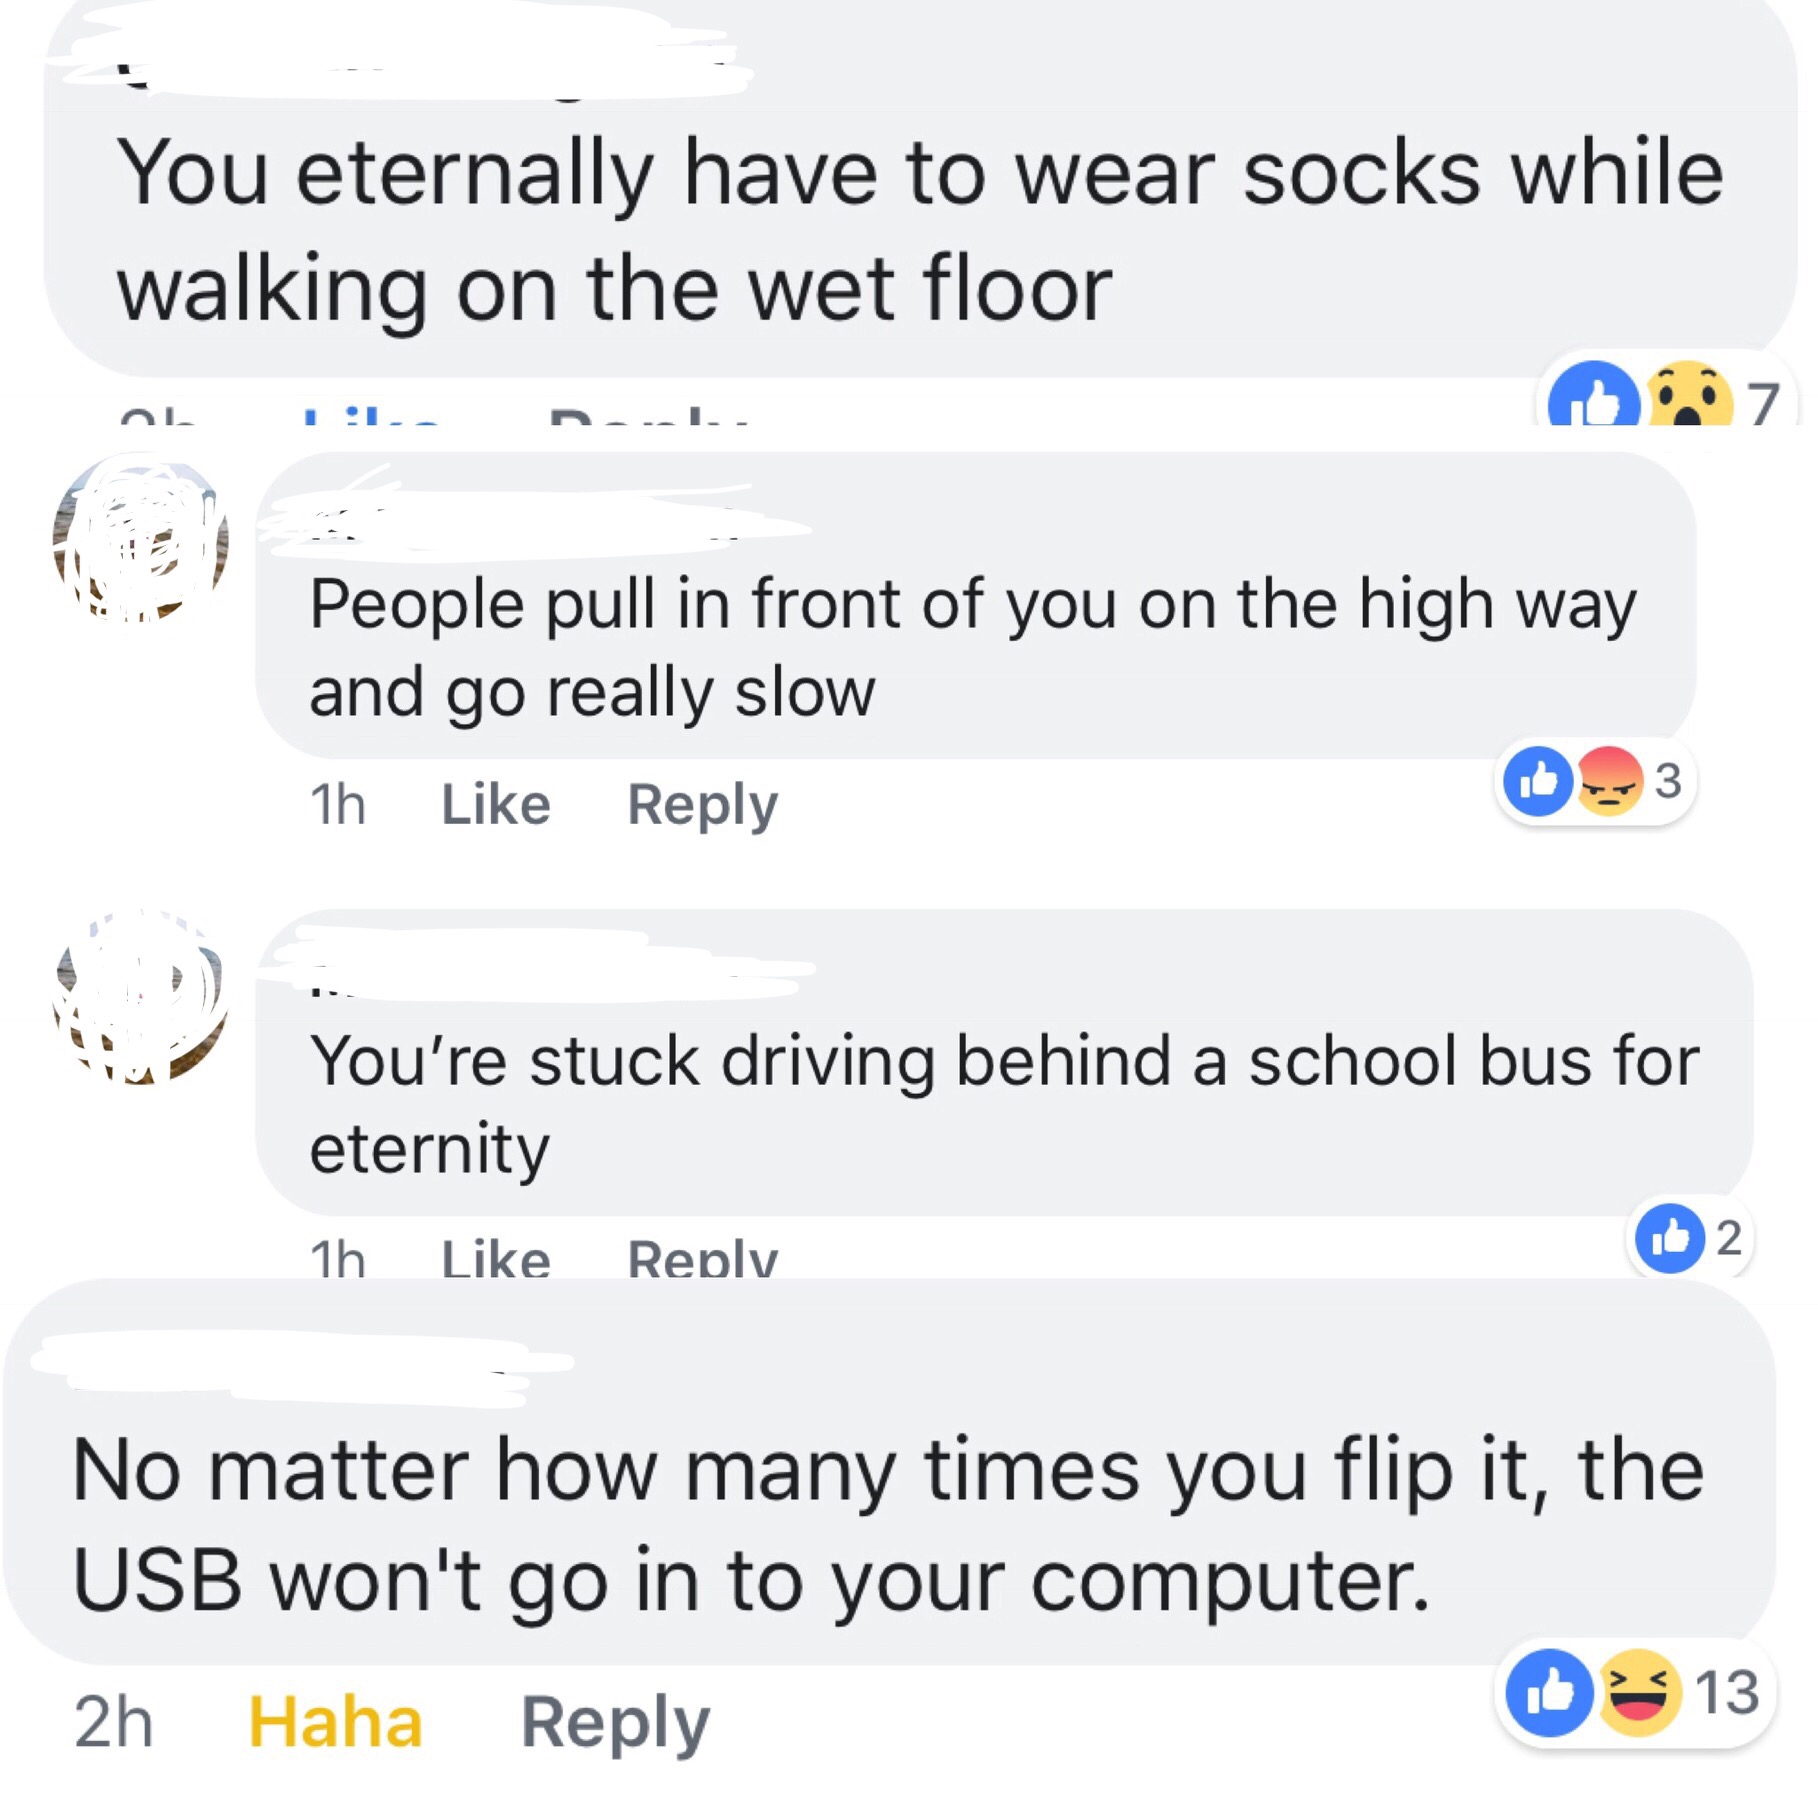 web page - You eternally have to wear socks while walking on the wet floor on 1. D I .. People pull in front of you on the high way and go really slow 1h D_ 3 You're stuck driving behind a school bus for eternity 1h No matter how many times you flip it, t